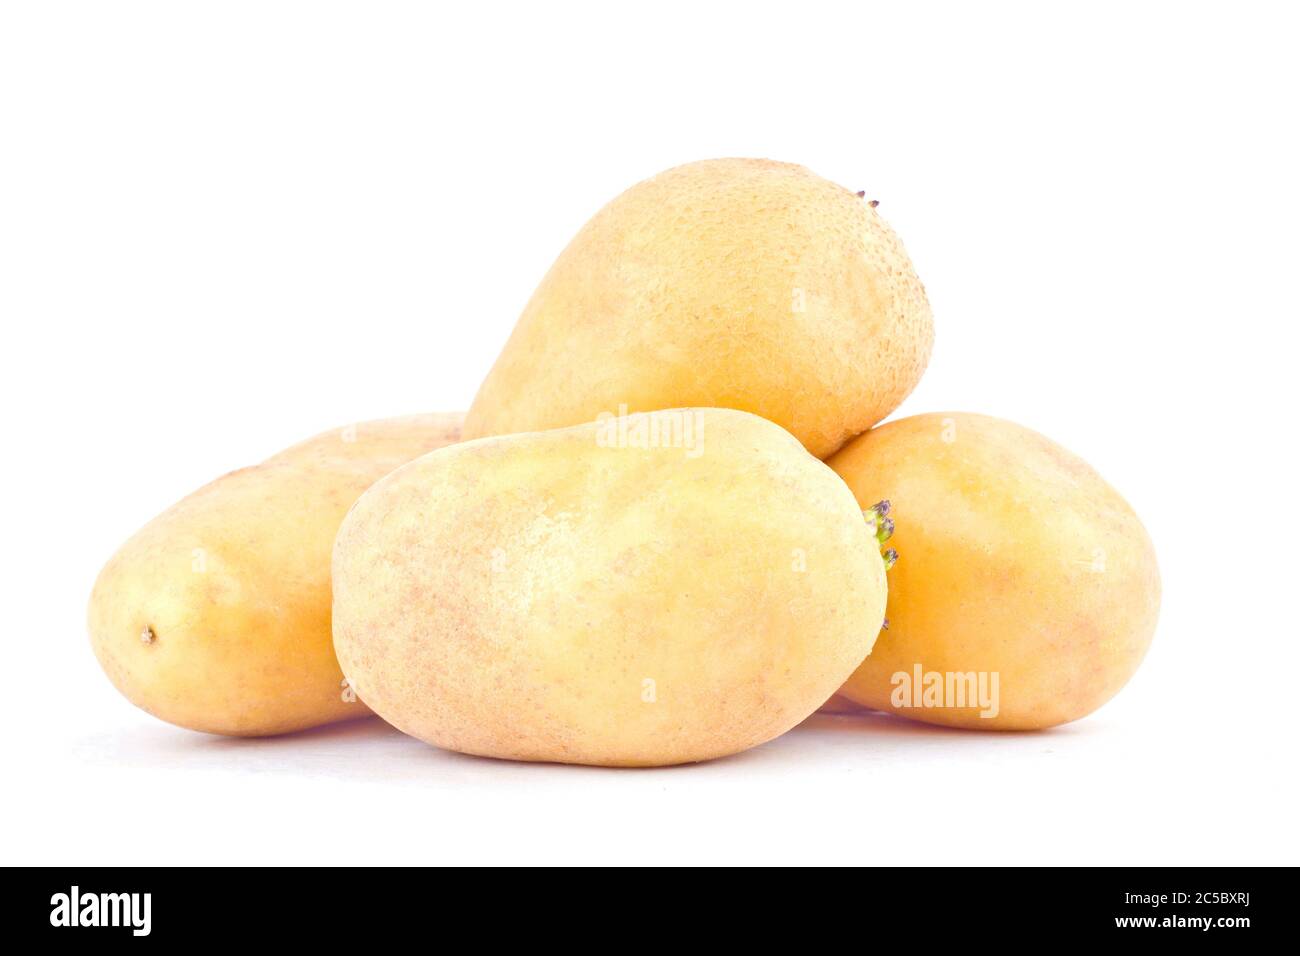 potatoes tubers  from the market on background healthy potato Vegetable food isolated Stock Photo